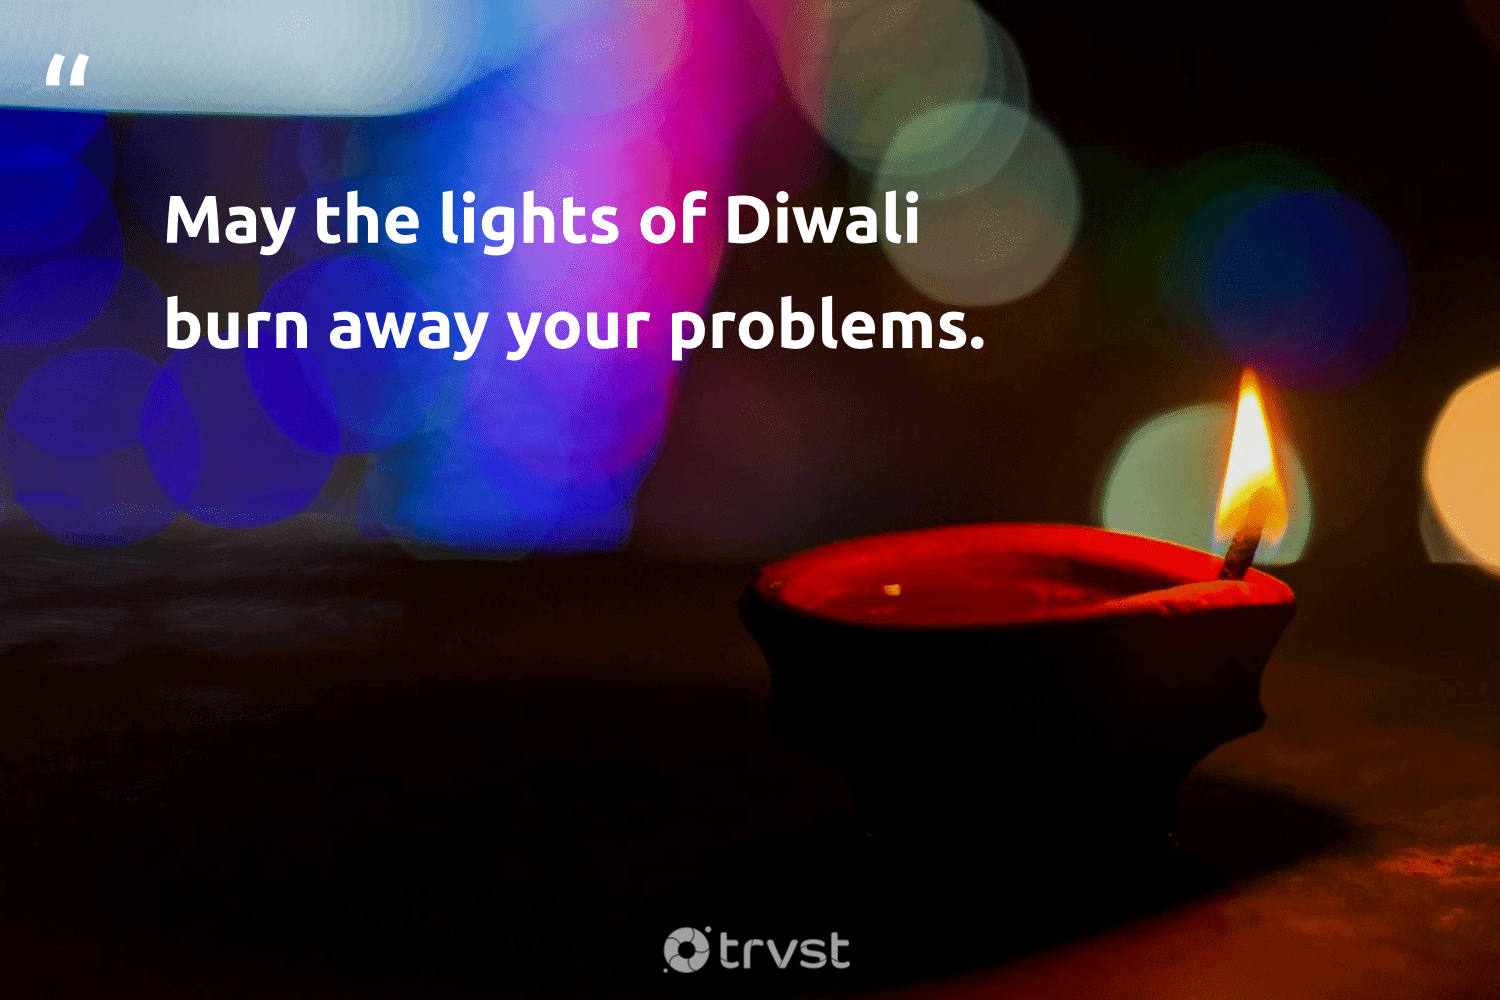 diwali quotes may the lights of diwali 8883